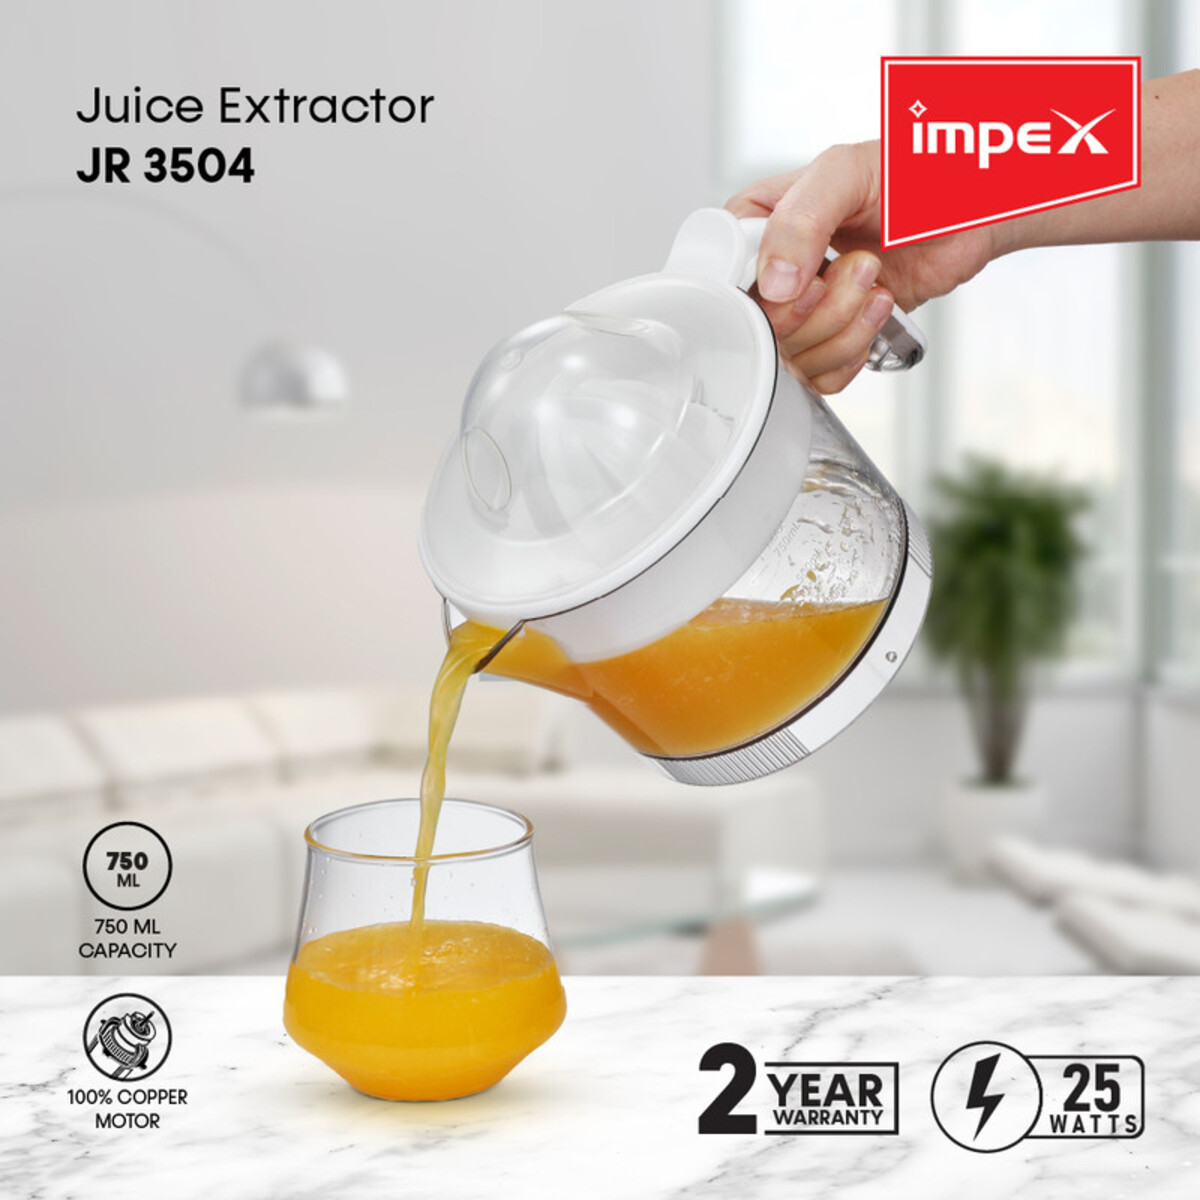 Impex JR 3504 25Watts 750ml Juice Extractor with 100% Copper motor